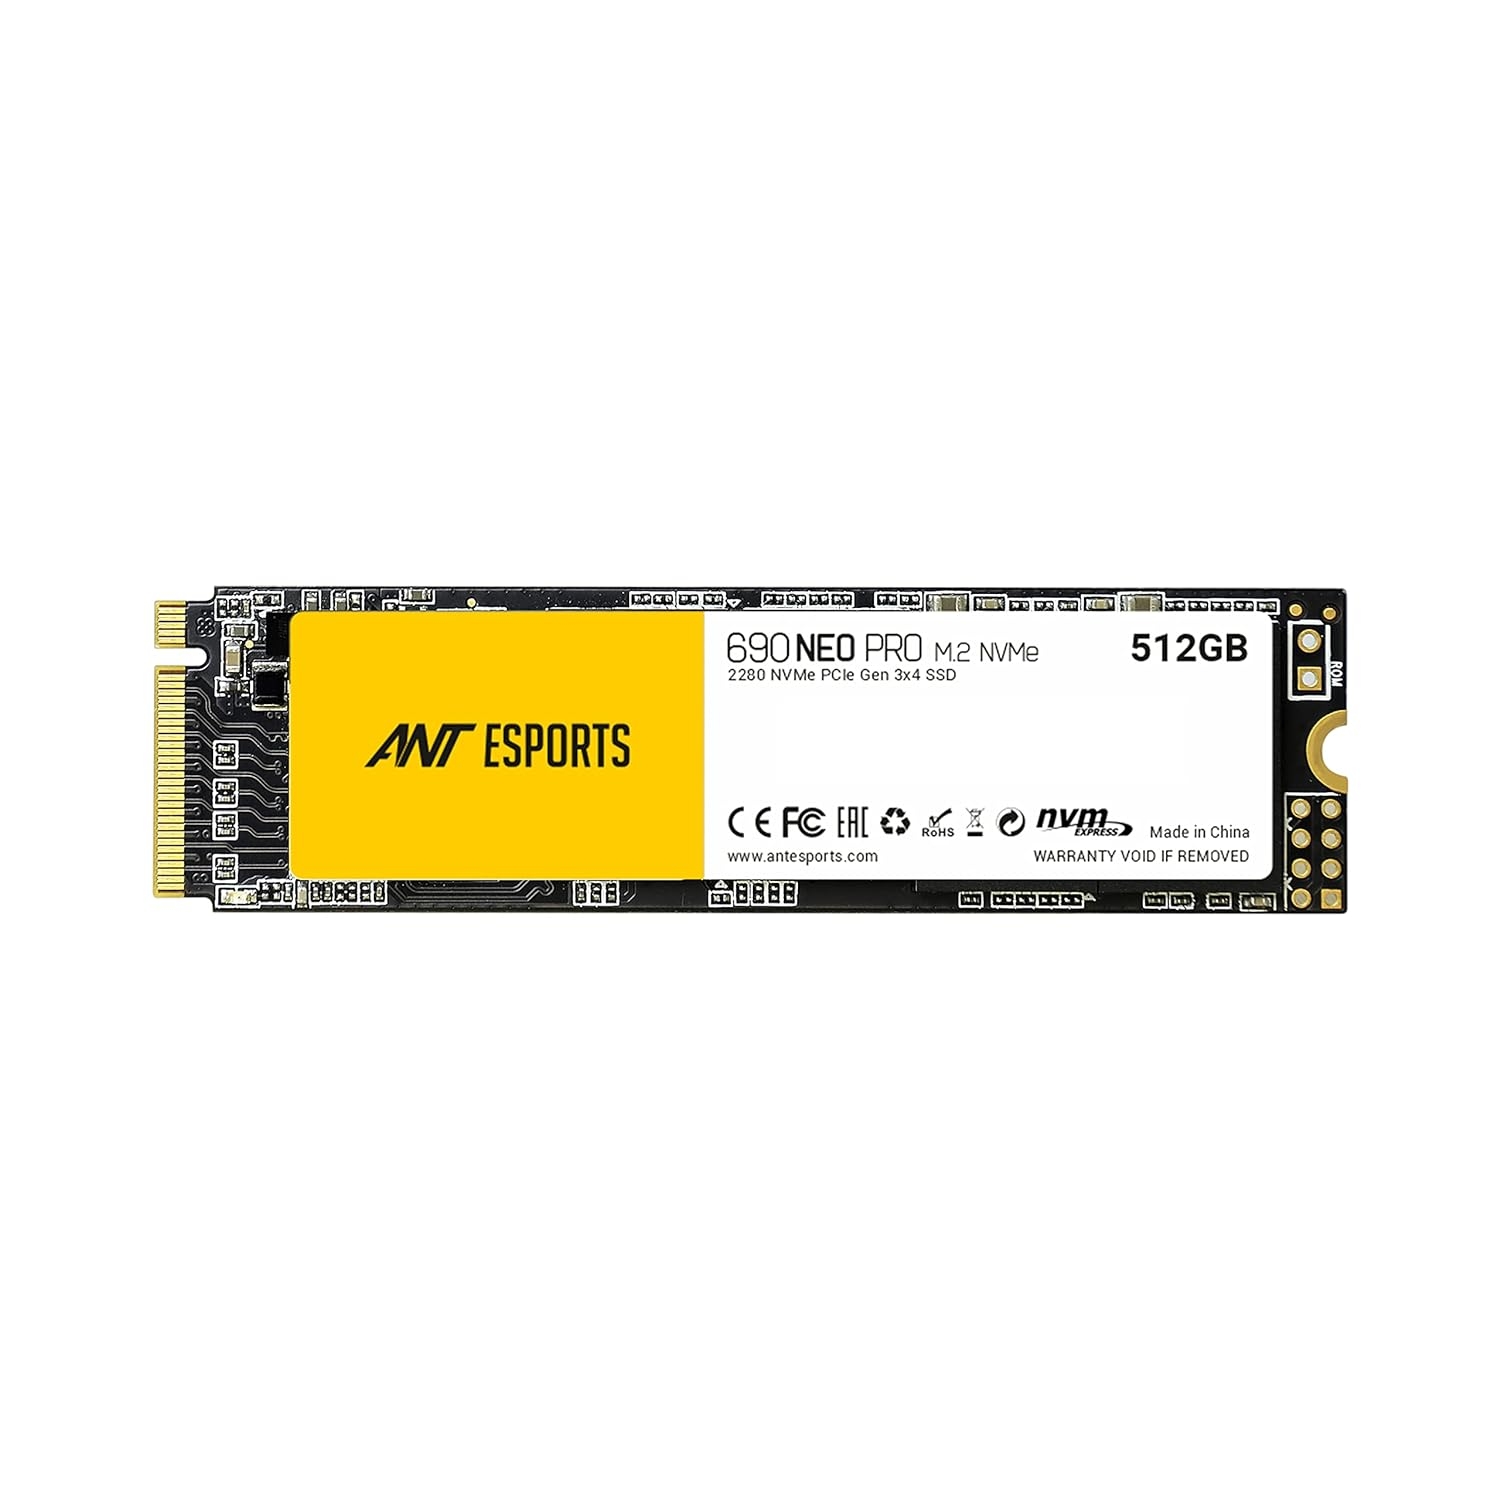 Ant Esports 690 Neo Pro M.2 NVME 512GB Internal Solid State Drive/SSD with NVME PCIe Gen3x4 Drive Supporting The PCI Express 3.1, speeds Upto Read/Write - 3100/2100 MB/s Compatible with PC and Laptop